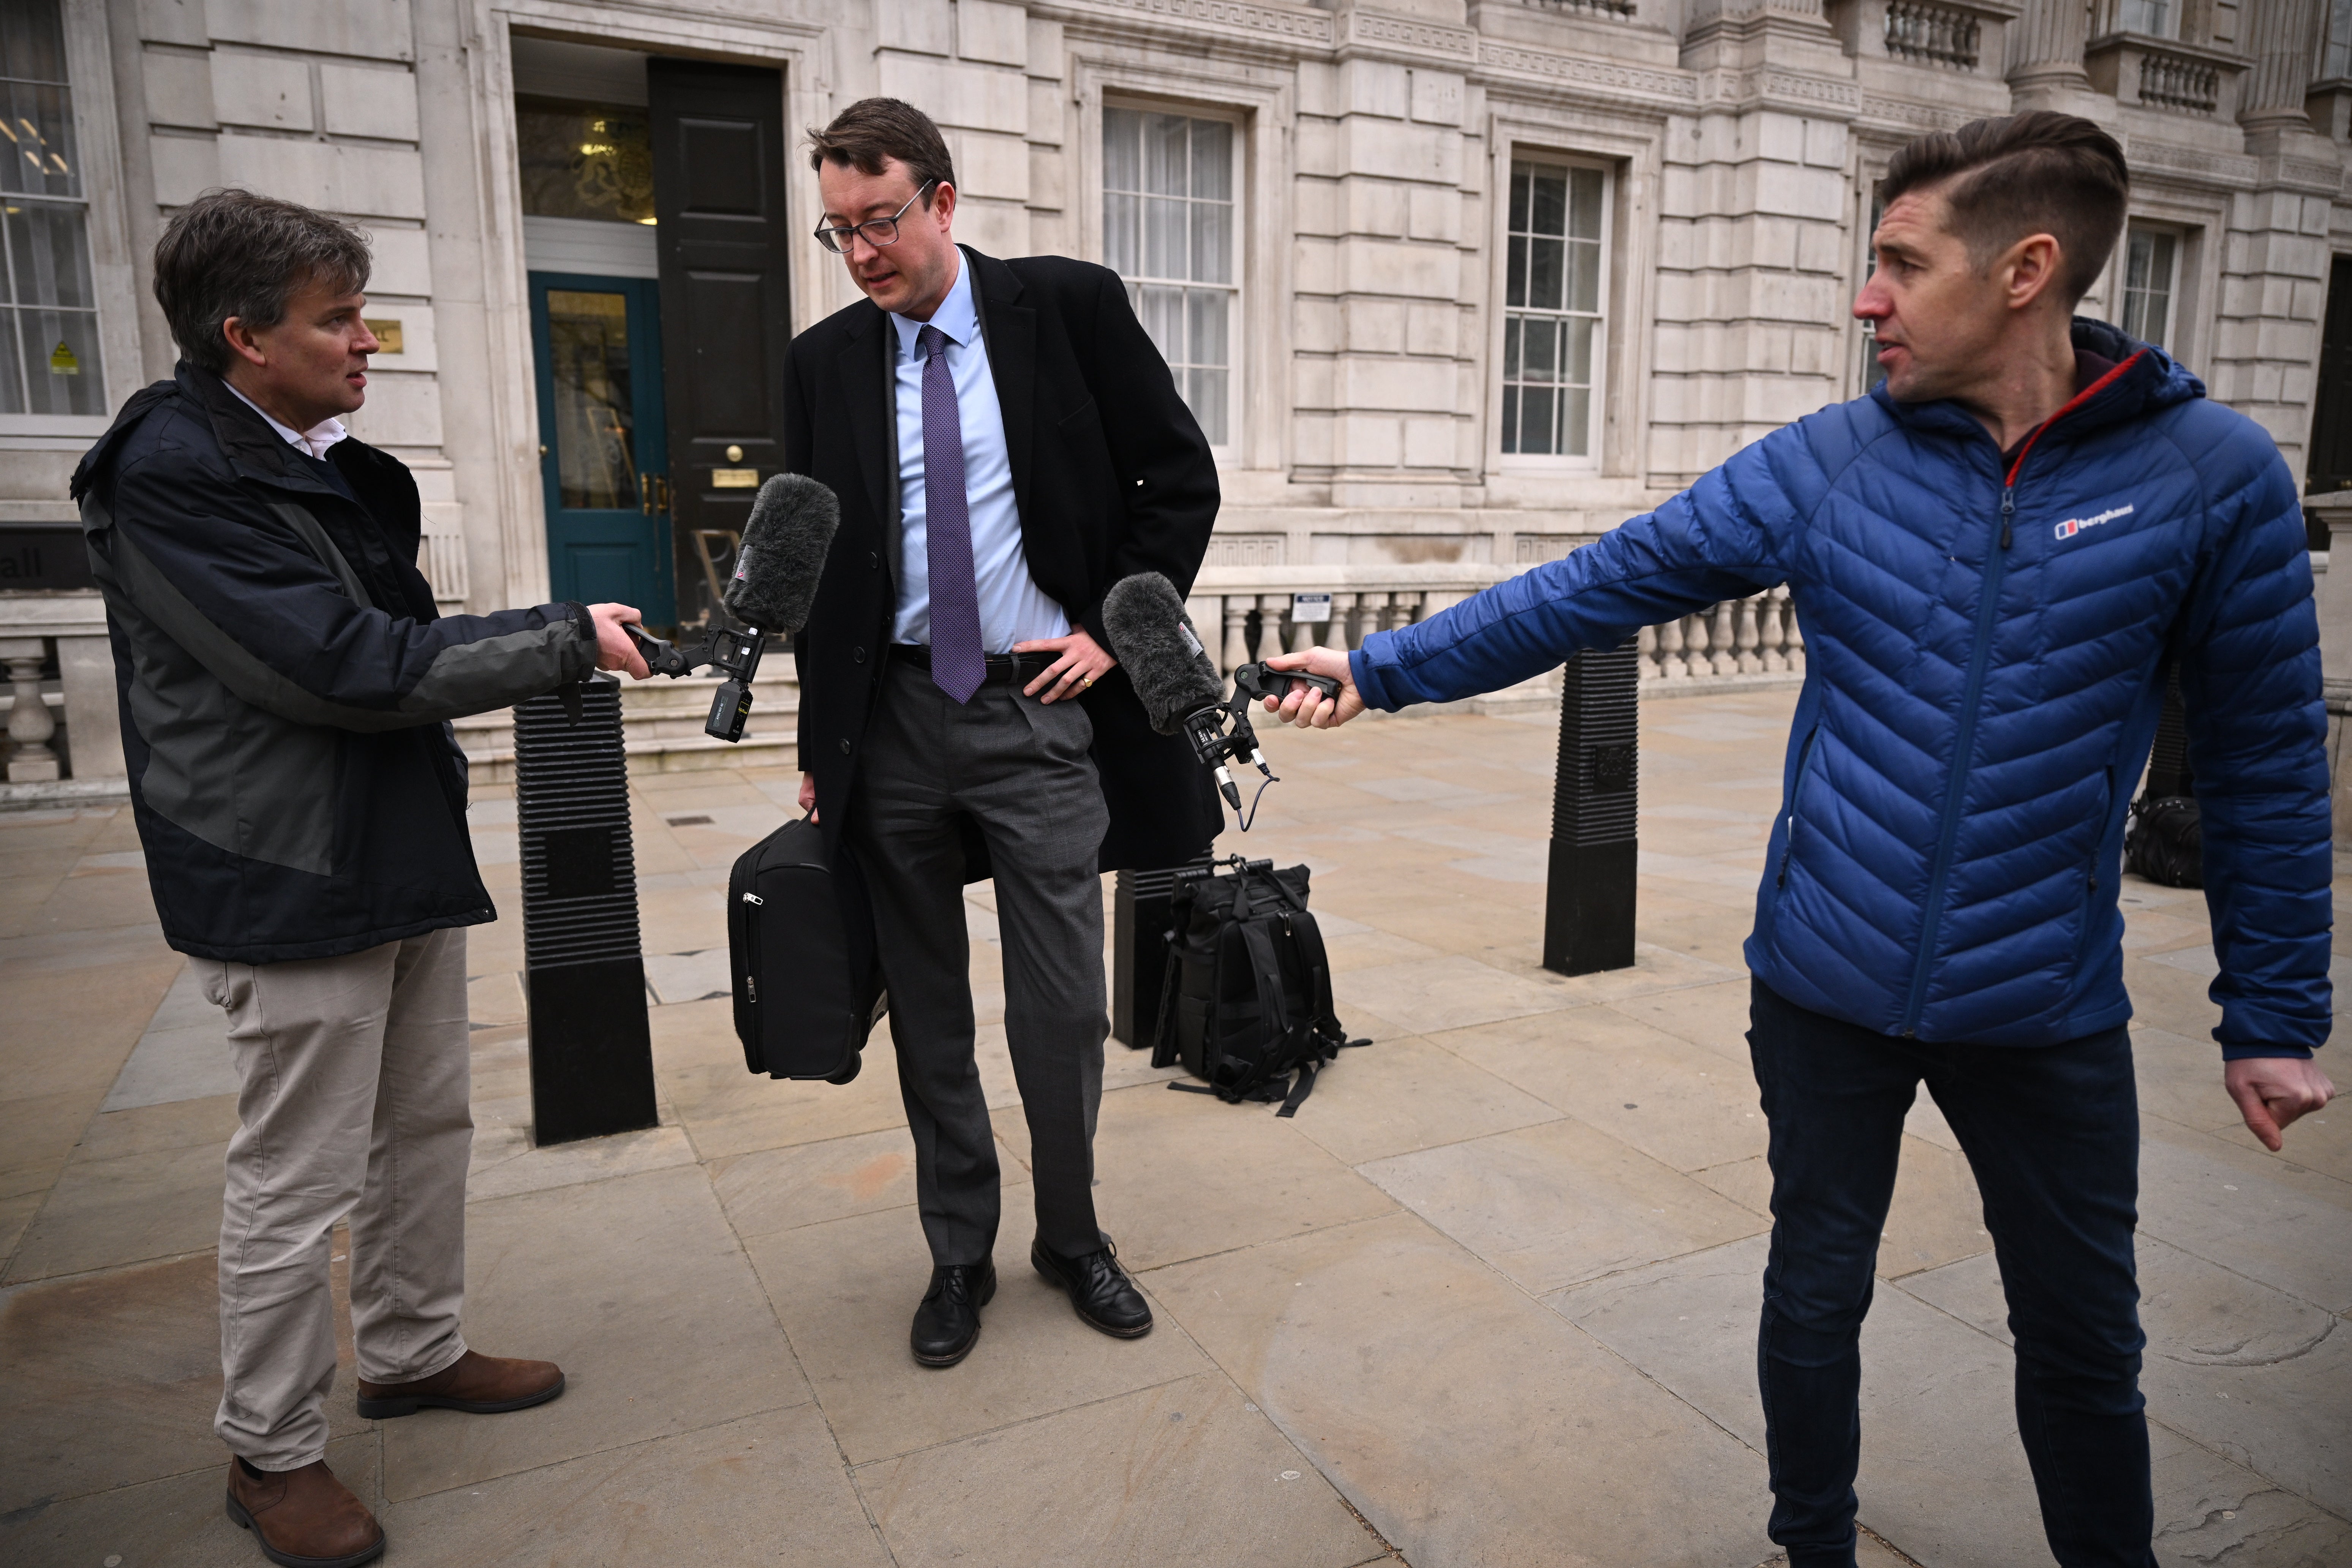 MP Simon Clarke speaks to the media after leaving cabinet office on Whitehall on February 08, 2022